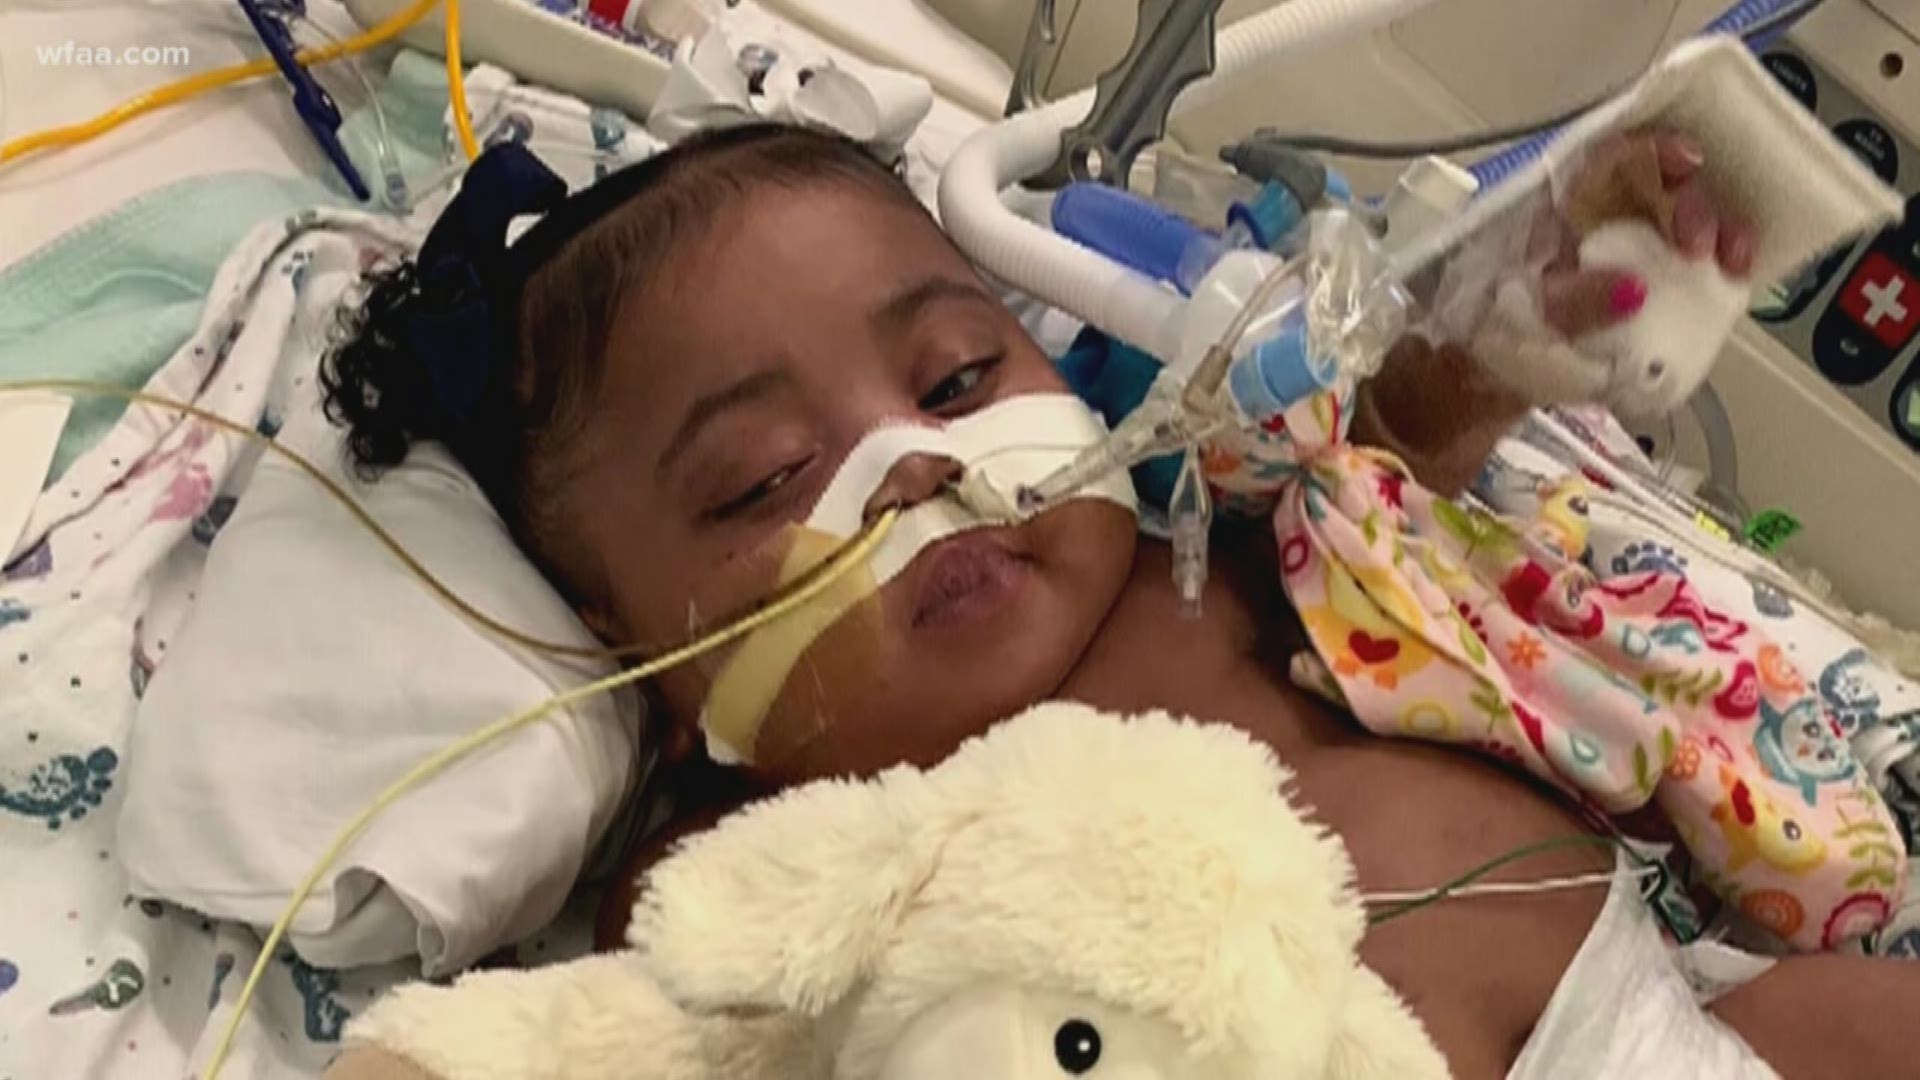 Tinslee Lewis is only 10 months old. She's been hospitalized with grave and heart problems since birth. She also hooked up to machines that help her breathe and eat.